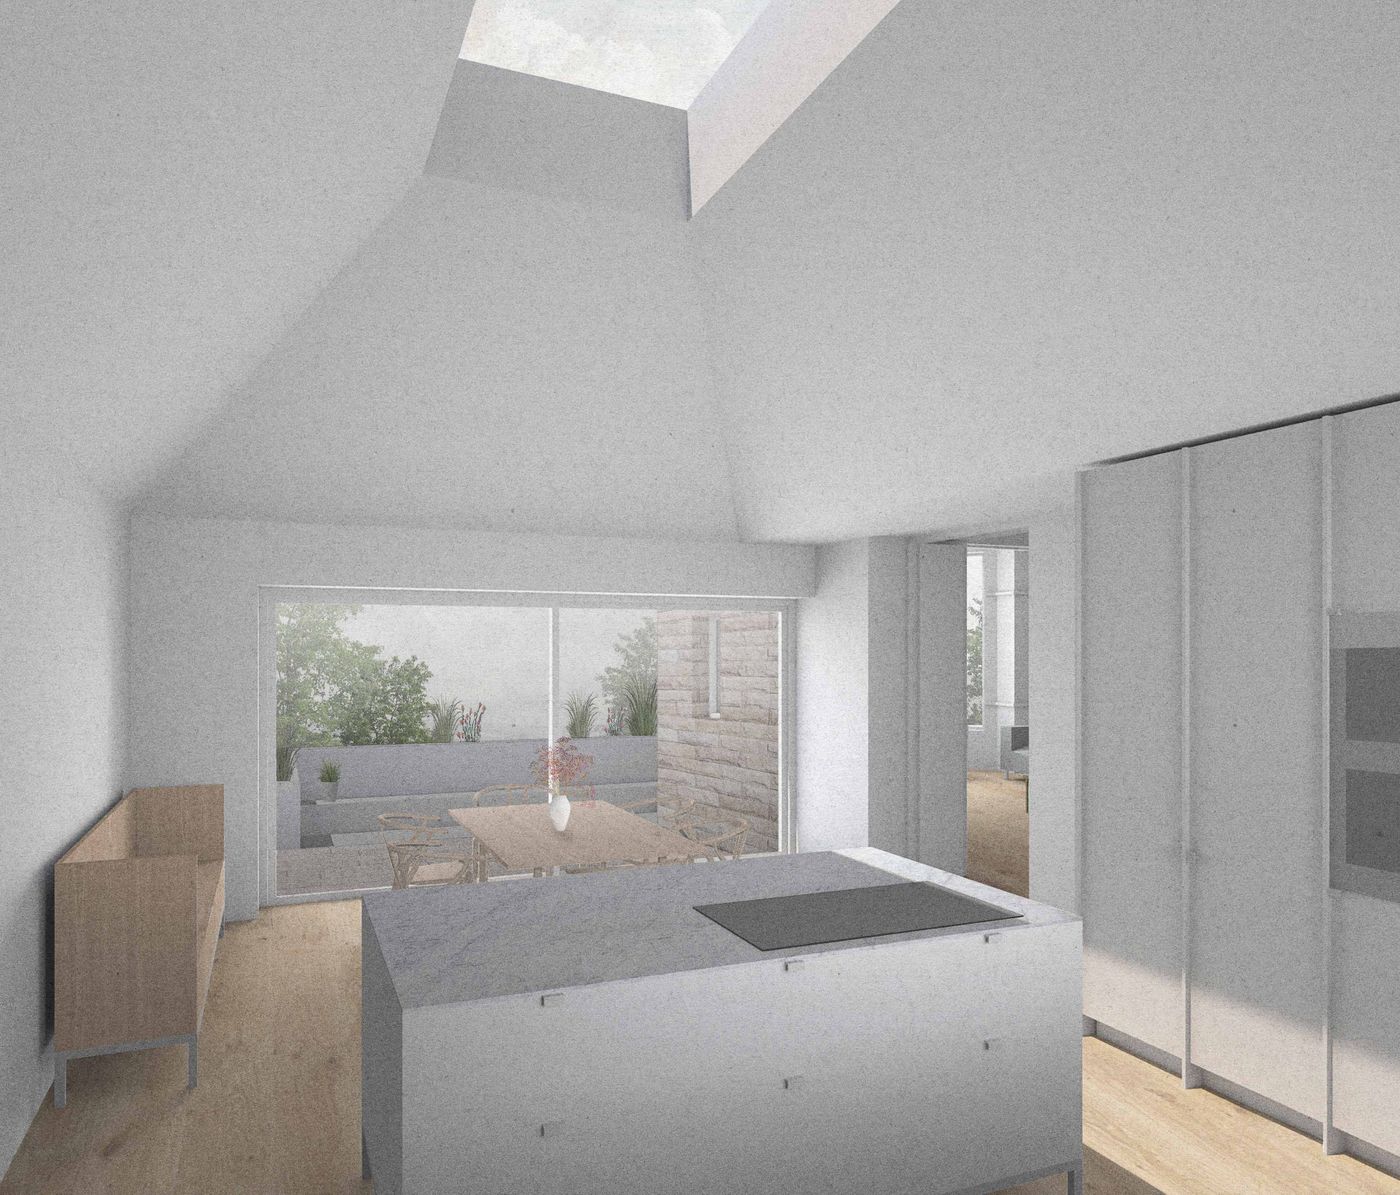 Proposed interior view of the new kitchen and dining space at Woodvale Road designed by From Works.